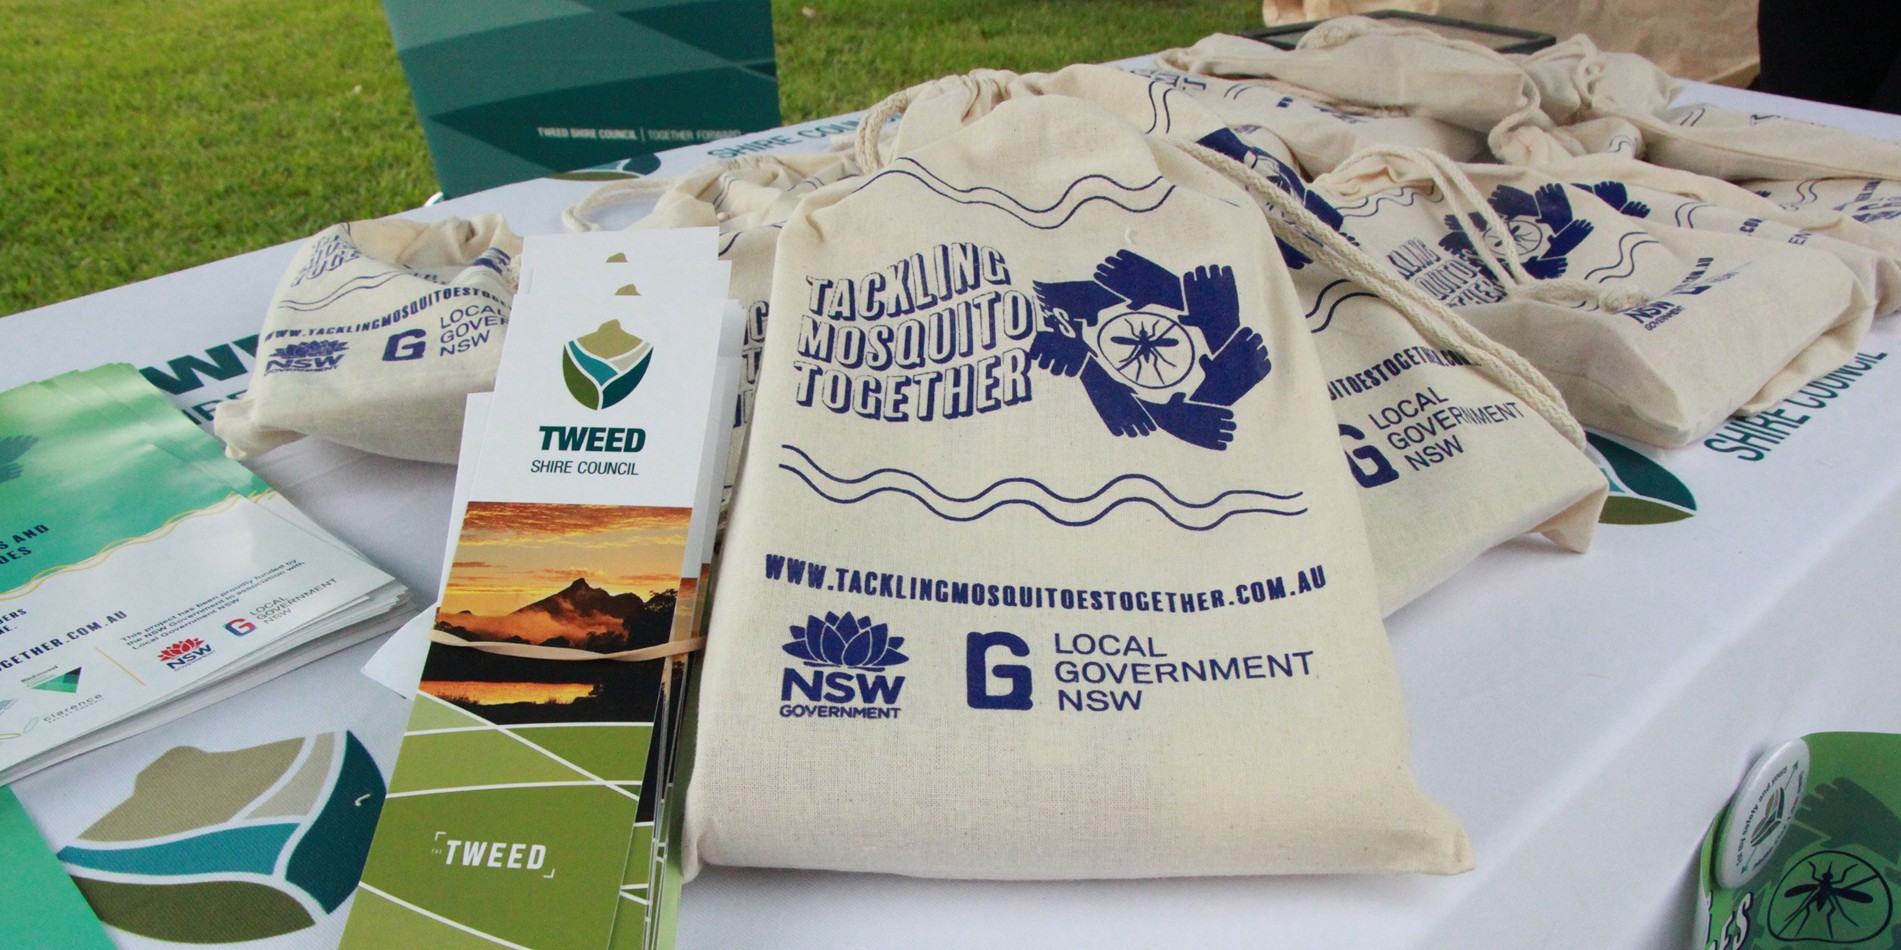 Tackling Mosquitoes Together campaign - Tweed Shire Council